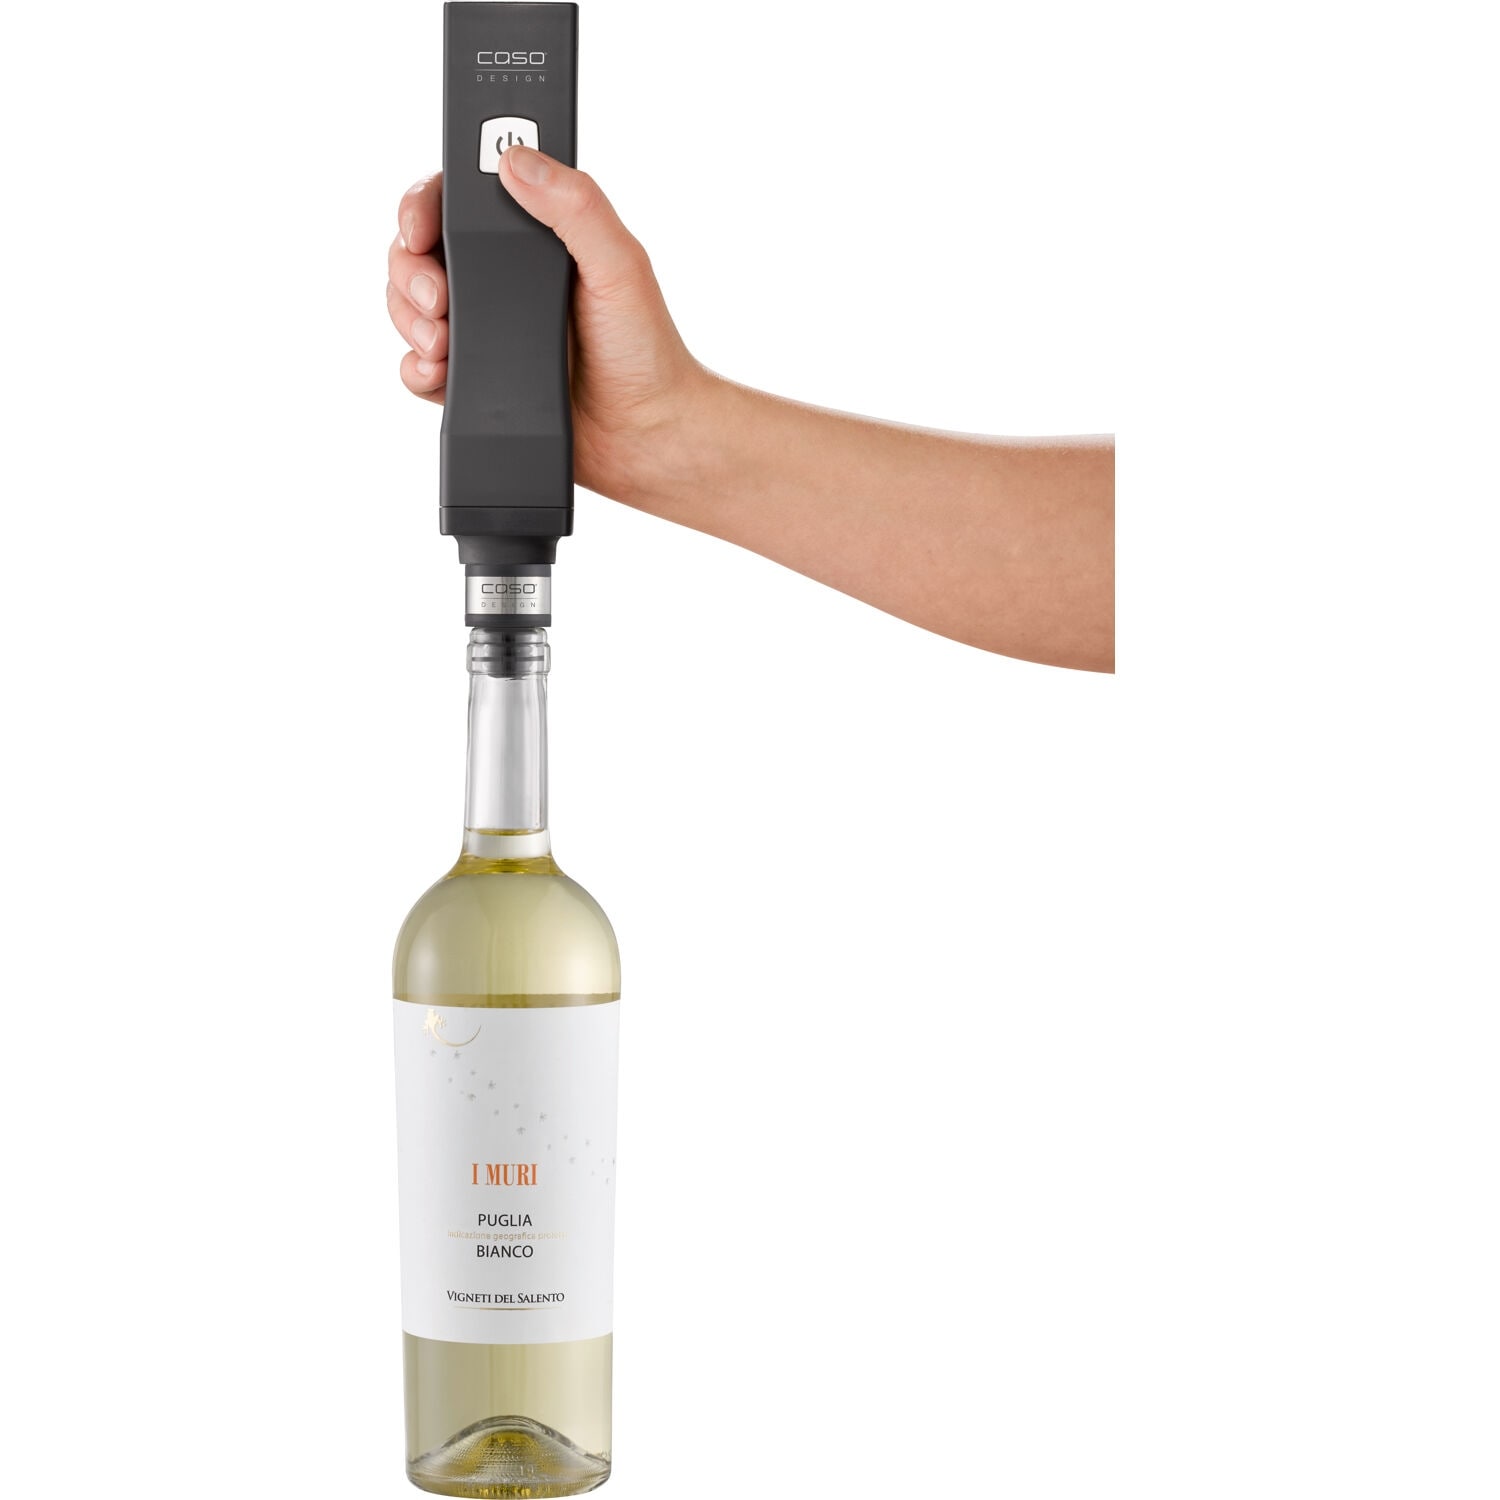 https://ak1.ostkcdn.com/images/products/is/images/direct/7efc4c3d8c45bf1d639dfdc712f2f4d50bec17f4/Caso-WineLock-Wine-Bottle-Preserver.jpg